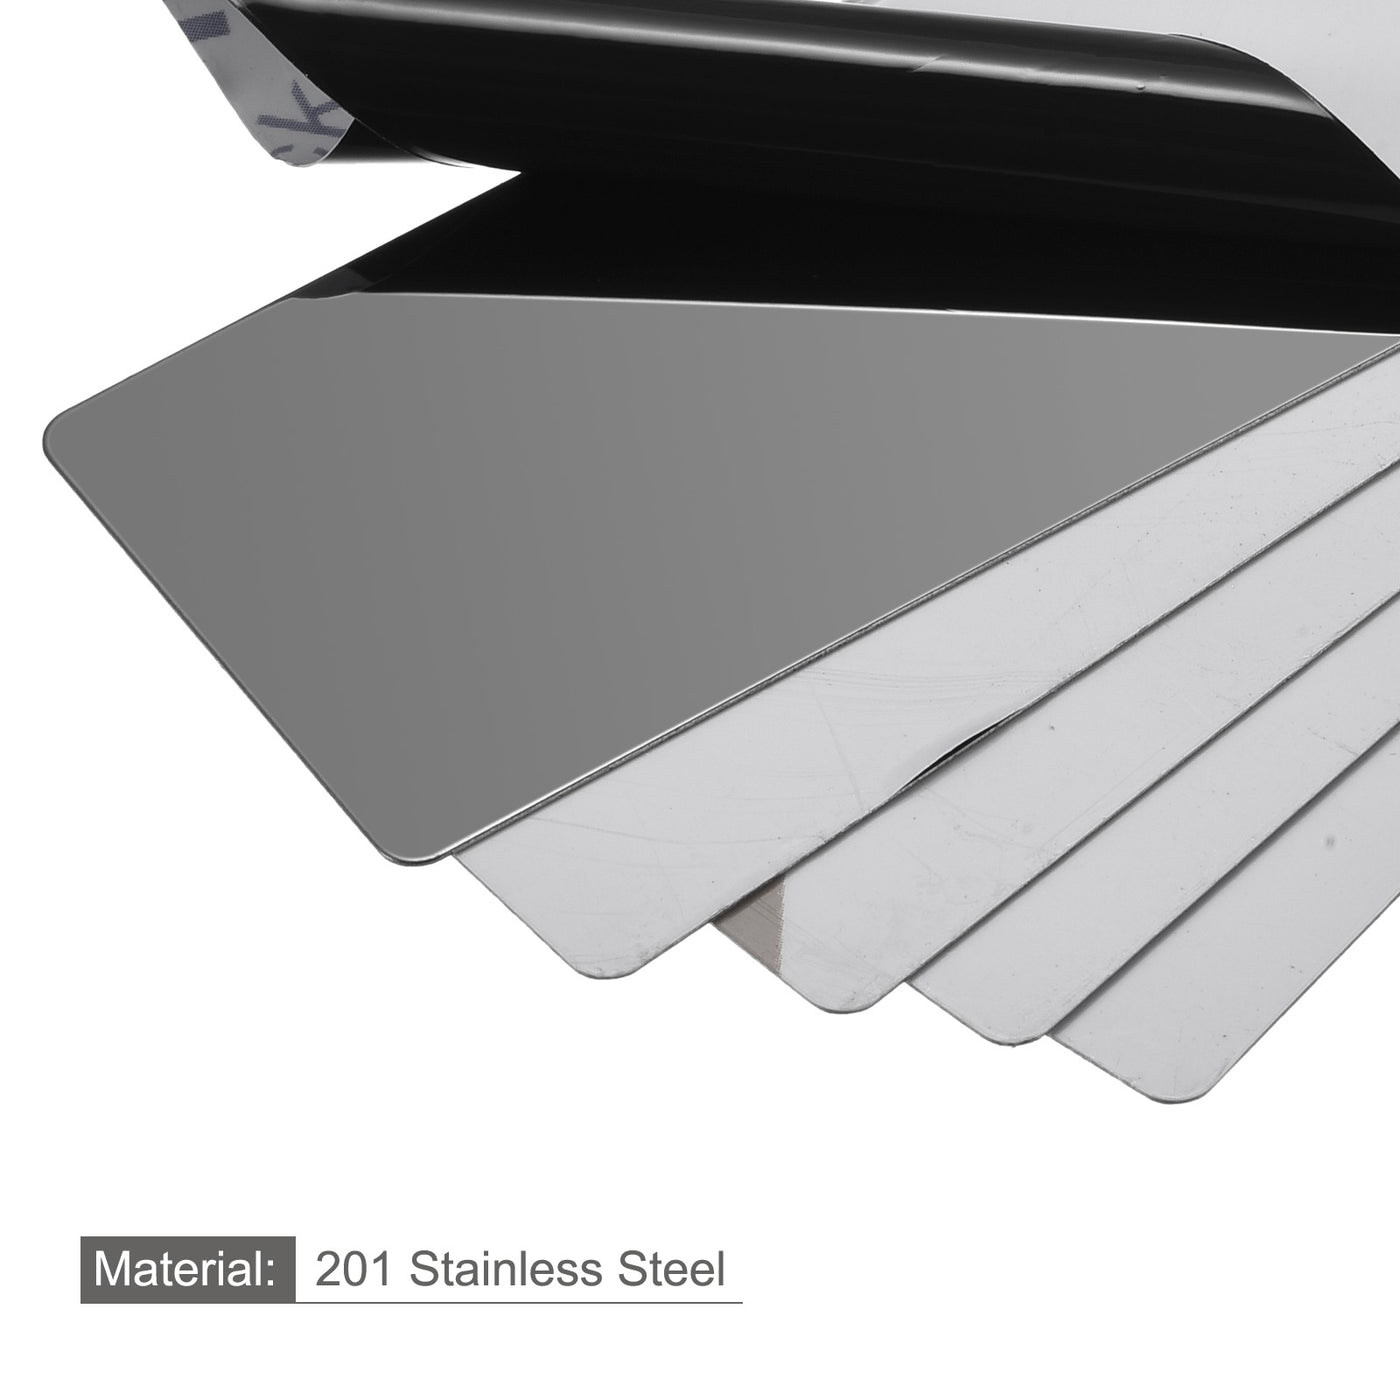 Uxcell Uxcell Blank Metal Card 80x30x0.4mm 201 Stainless Steel Plate Polished Dark Gray 10 Pcs